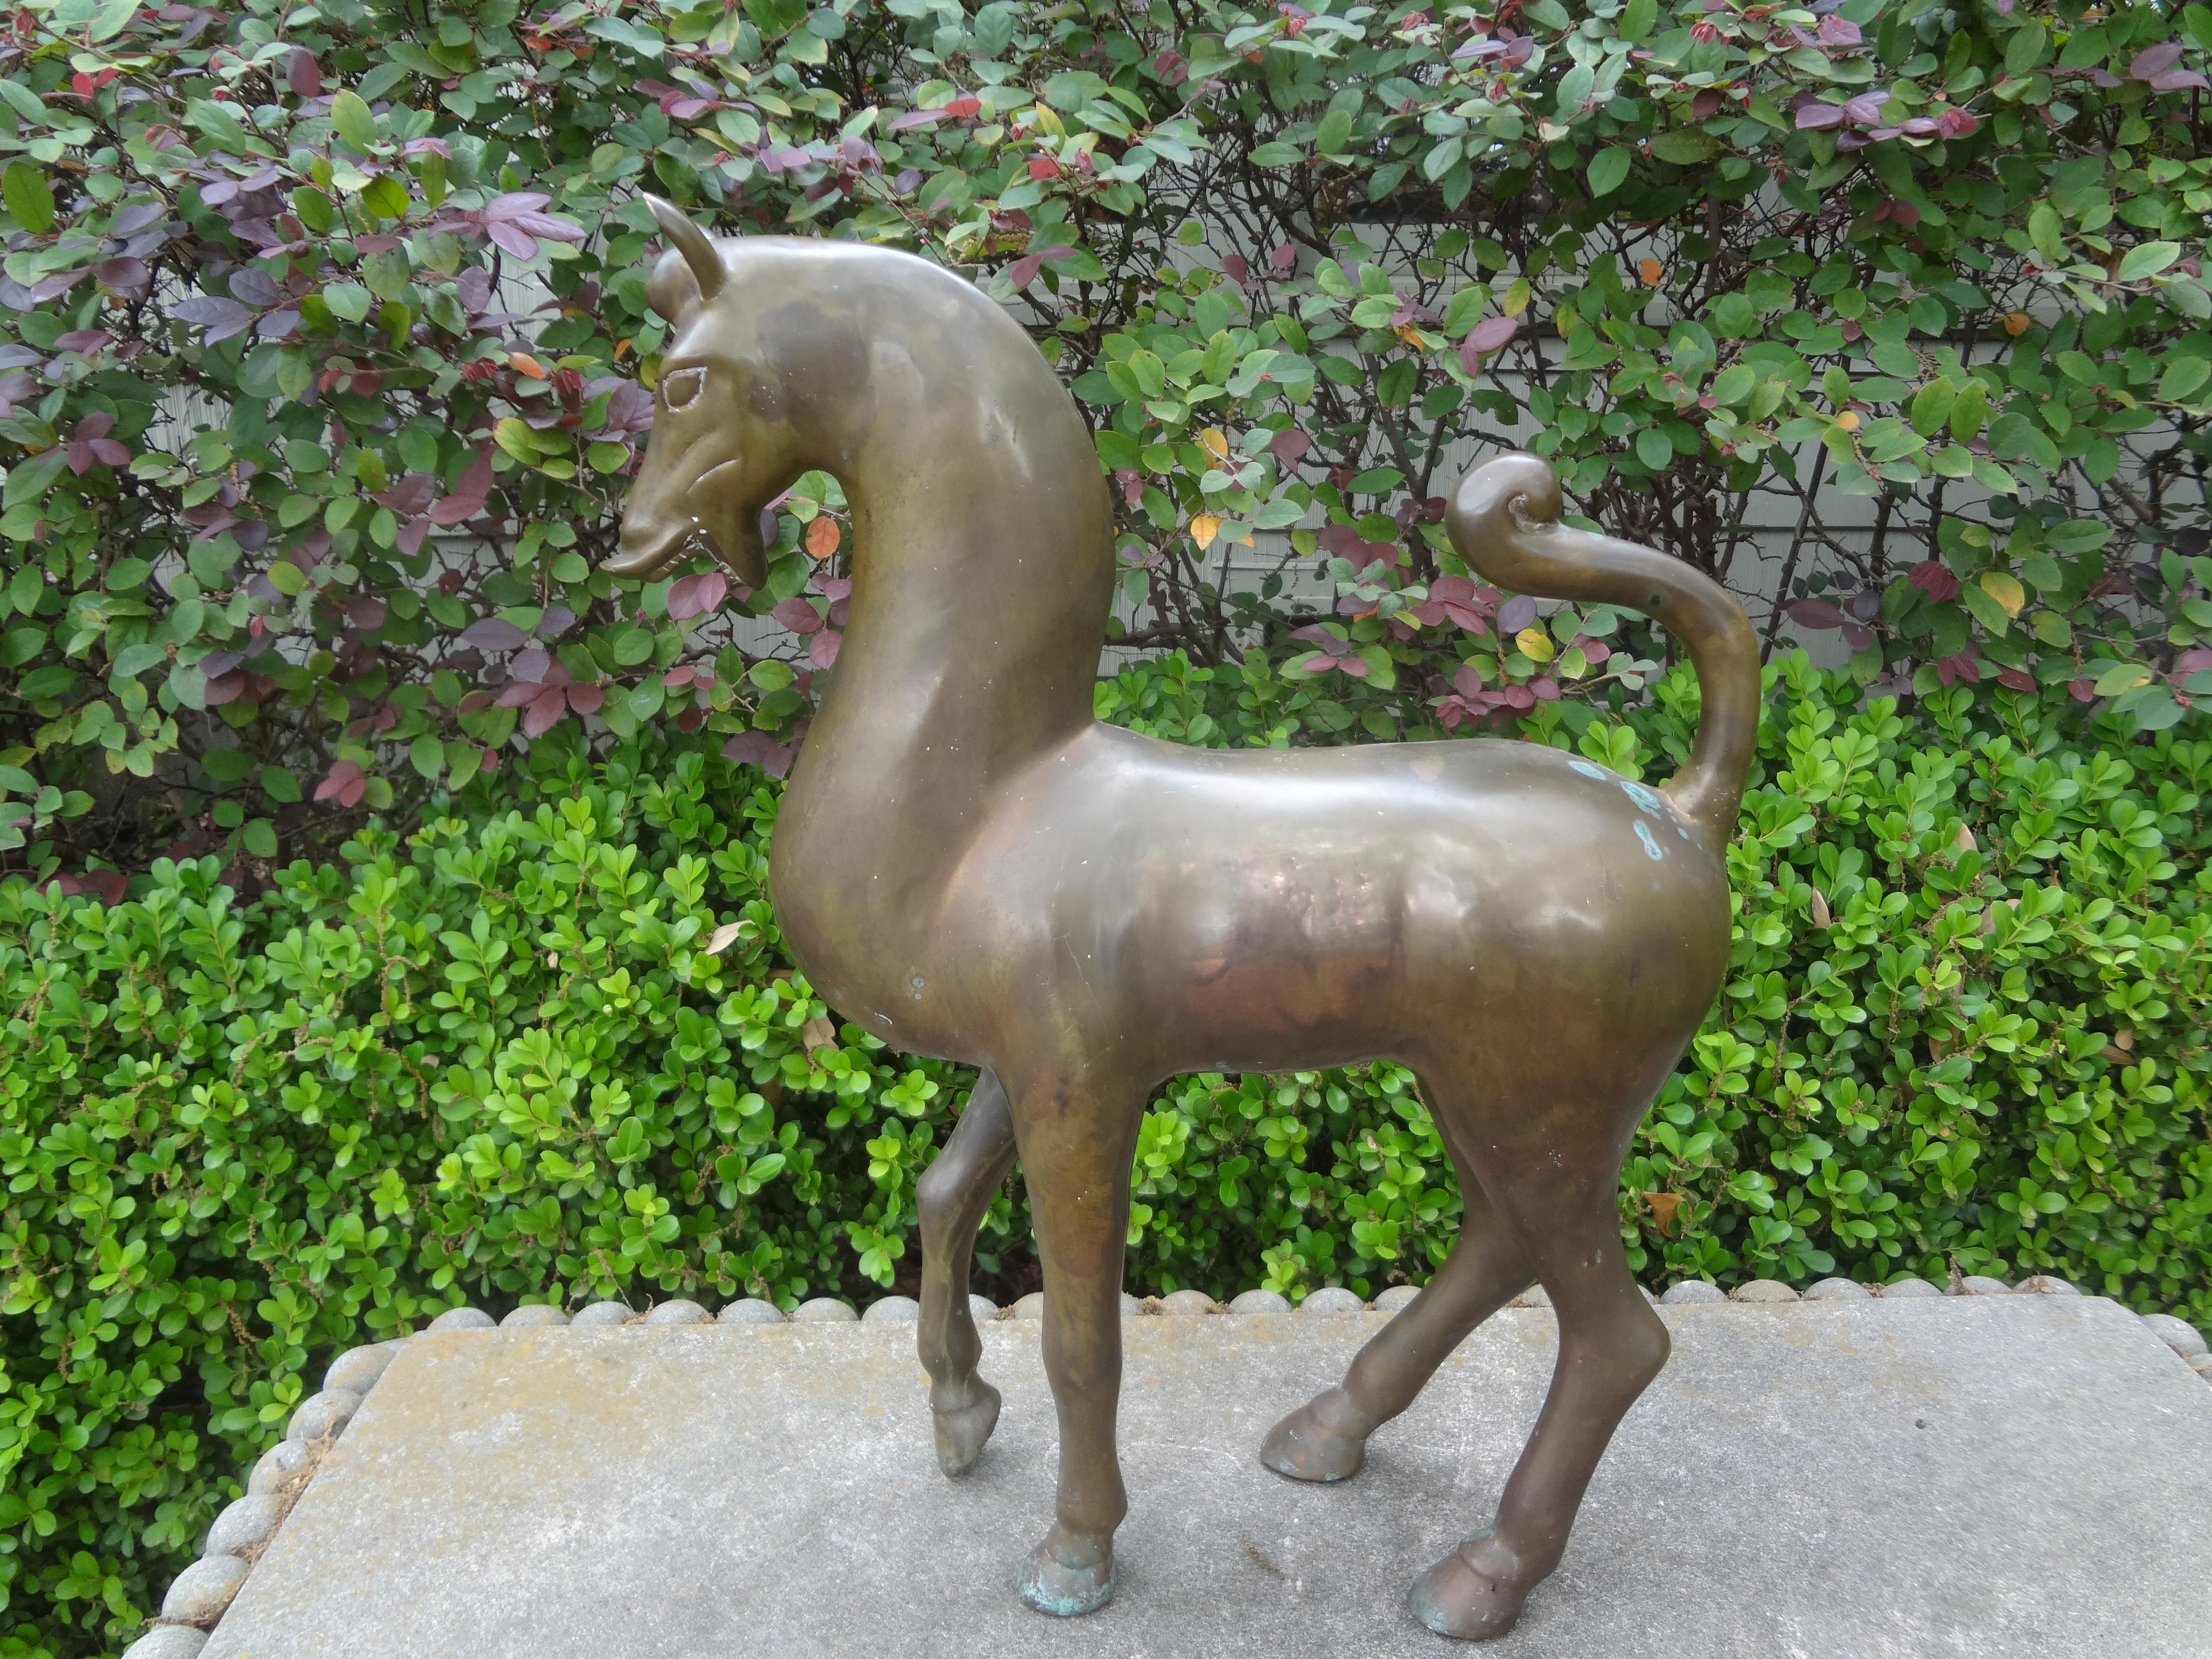 Large Hollywood Regency brass tang horse sculpture.
Stunning large vintage brass Tang horse sculpture. Our Mid-Century Modern brass horse figure or sculpture stands in a commanding position. 
Nice patina but could be highly polished if